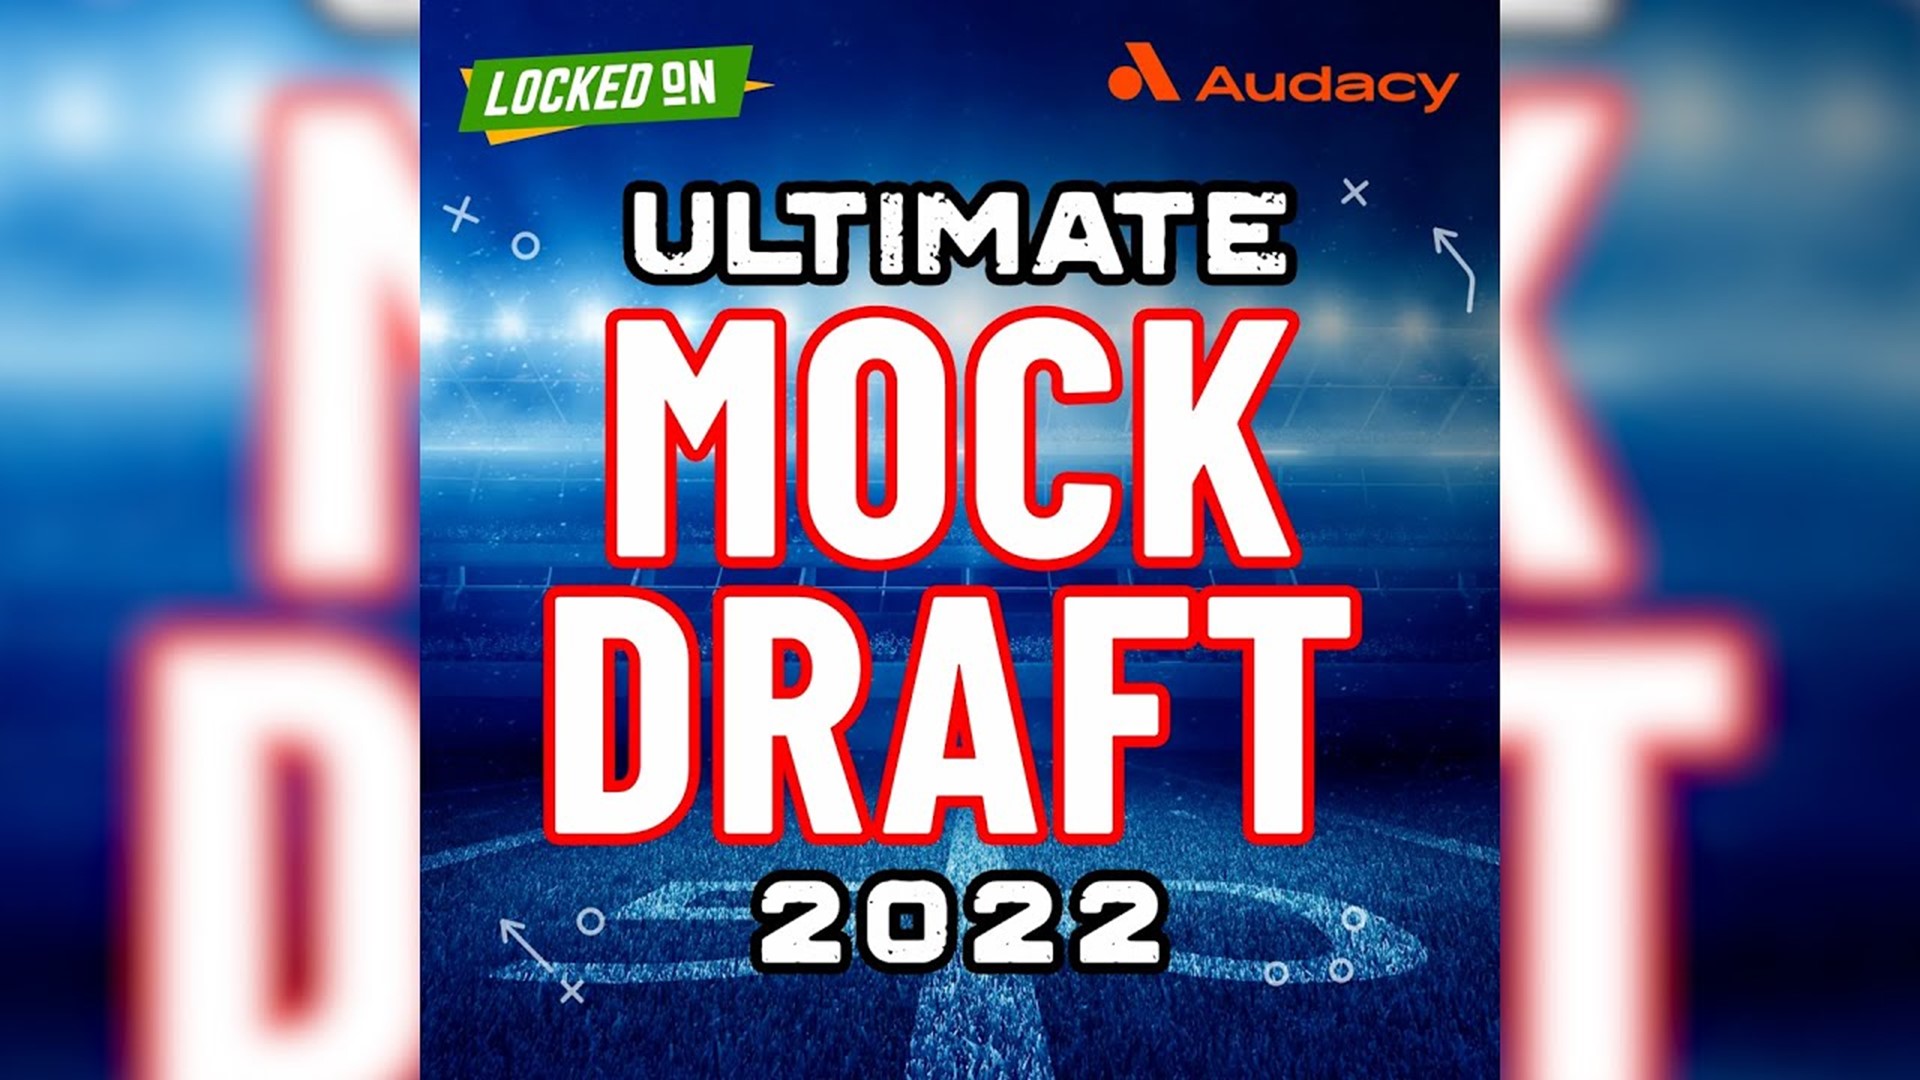 Ultimate NFL Mock Draft 2022: Every First Round Draft Selection Made by Local Locked On NFL Experts!